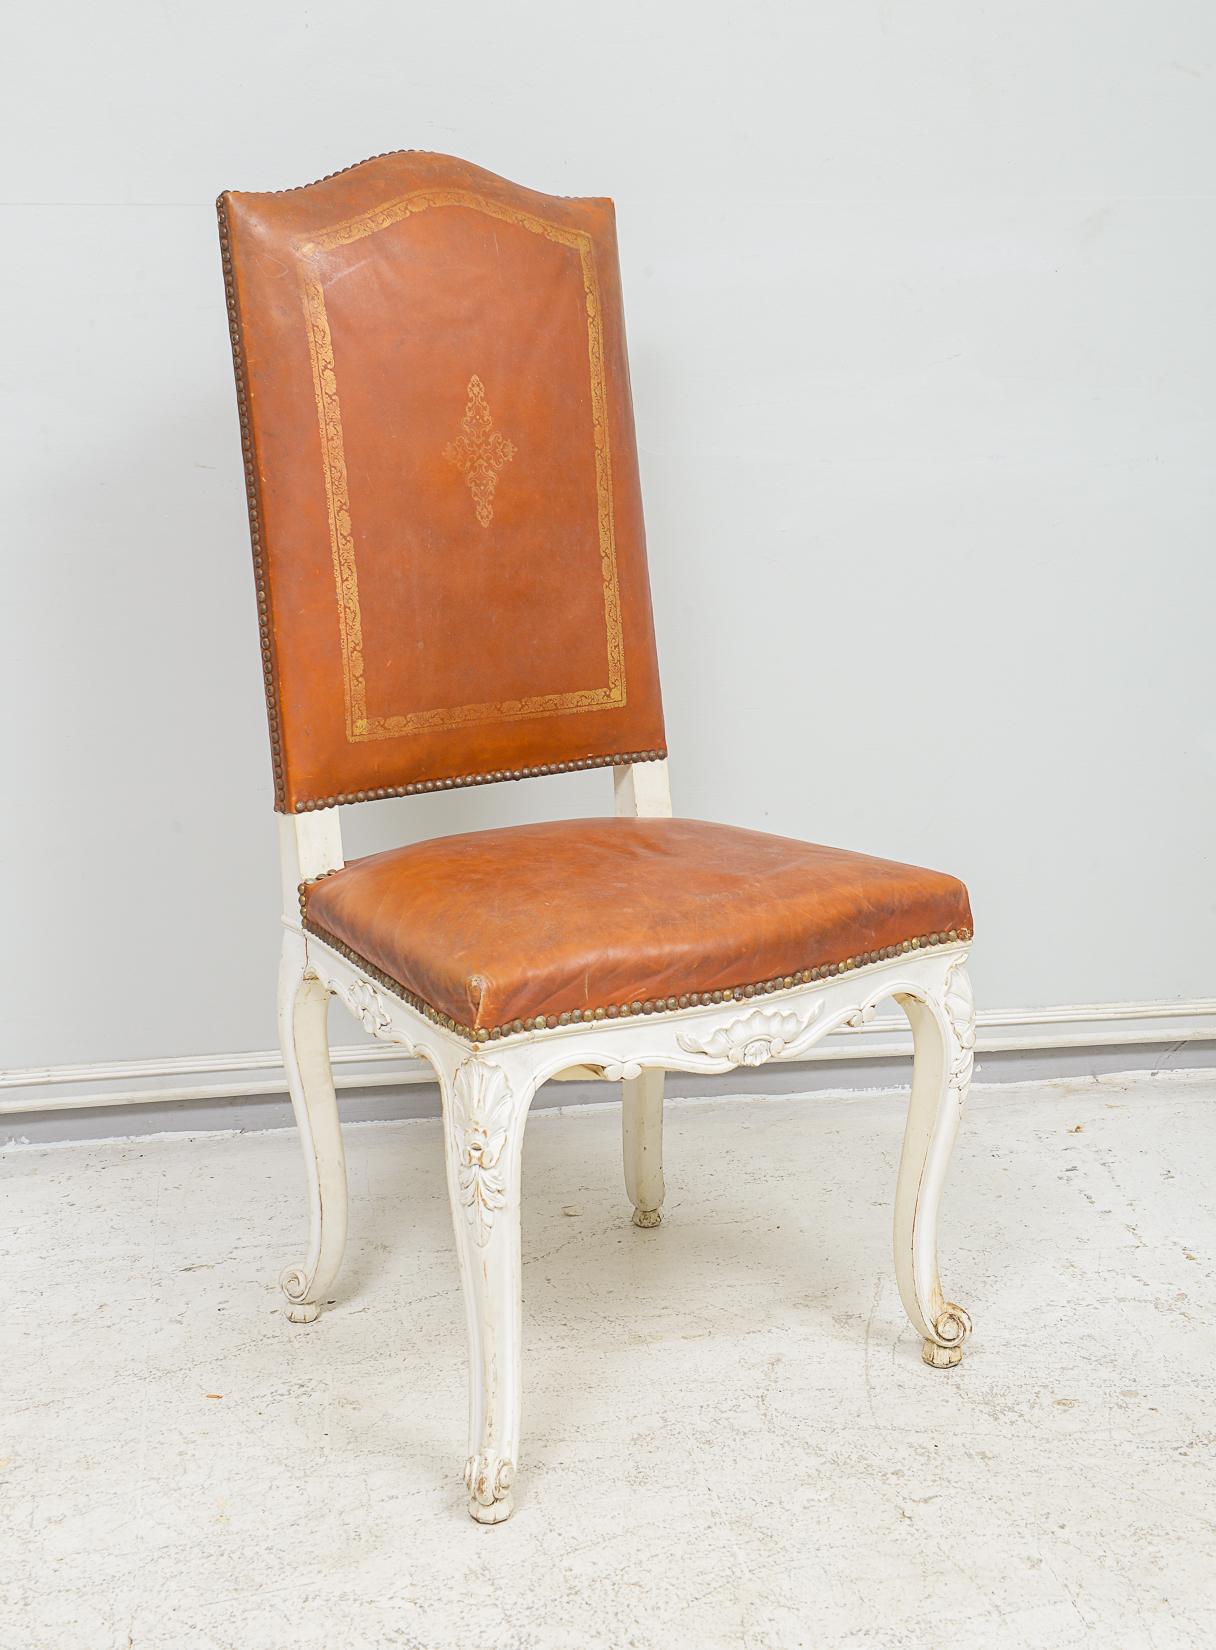 Set of Eight French  High-Back Leather Chairs in the Regence Manner 
with original leather - very comfortable.
Structurally very good condition - some wear consistent with age 